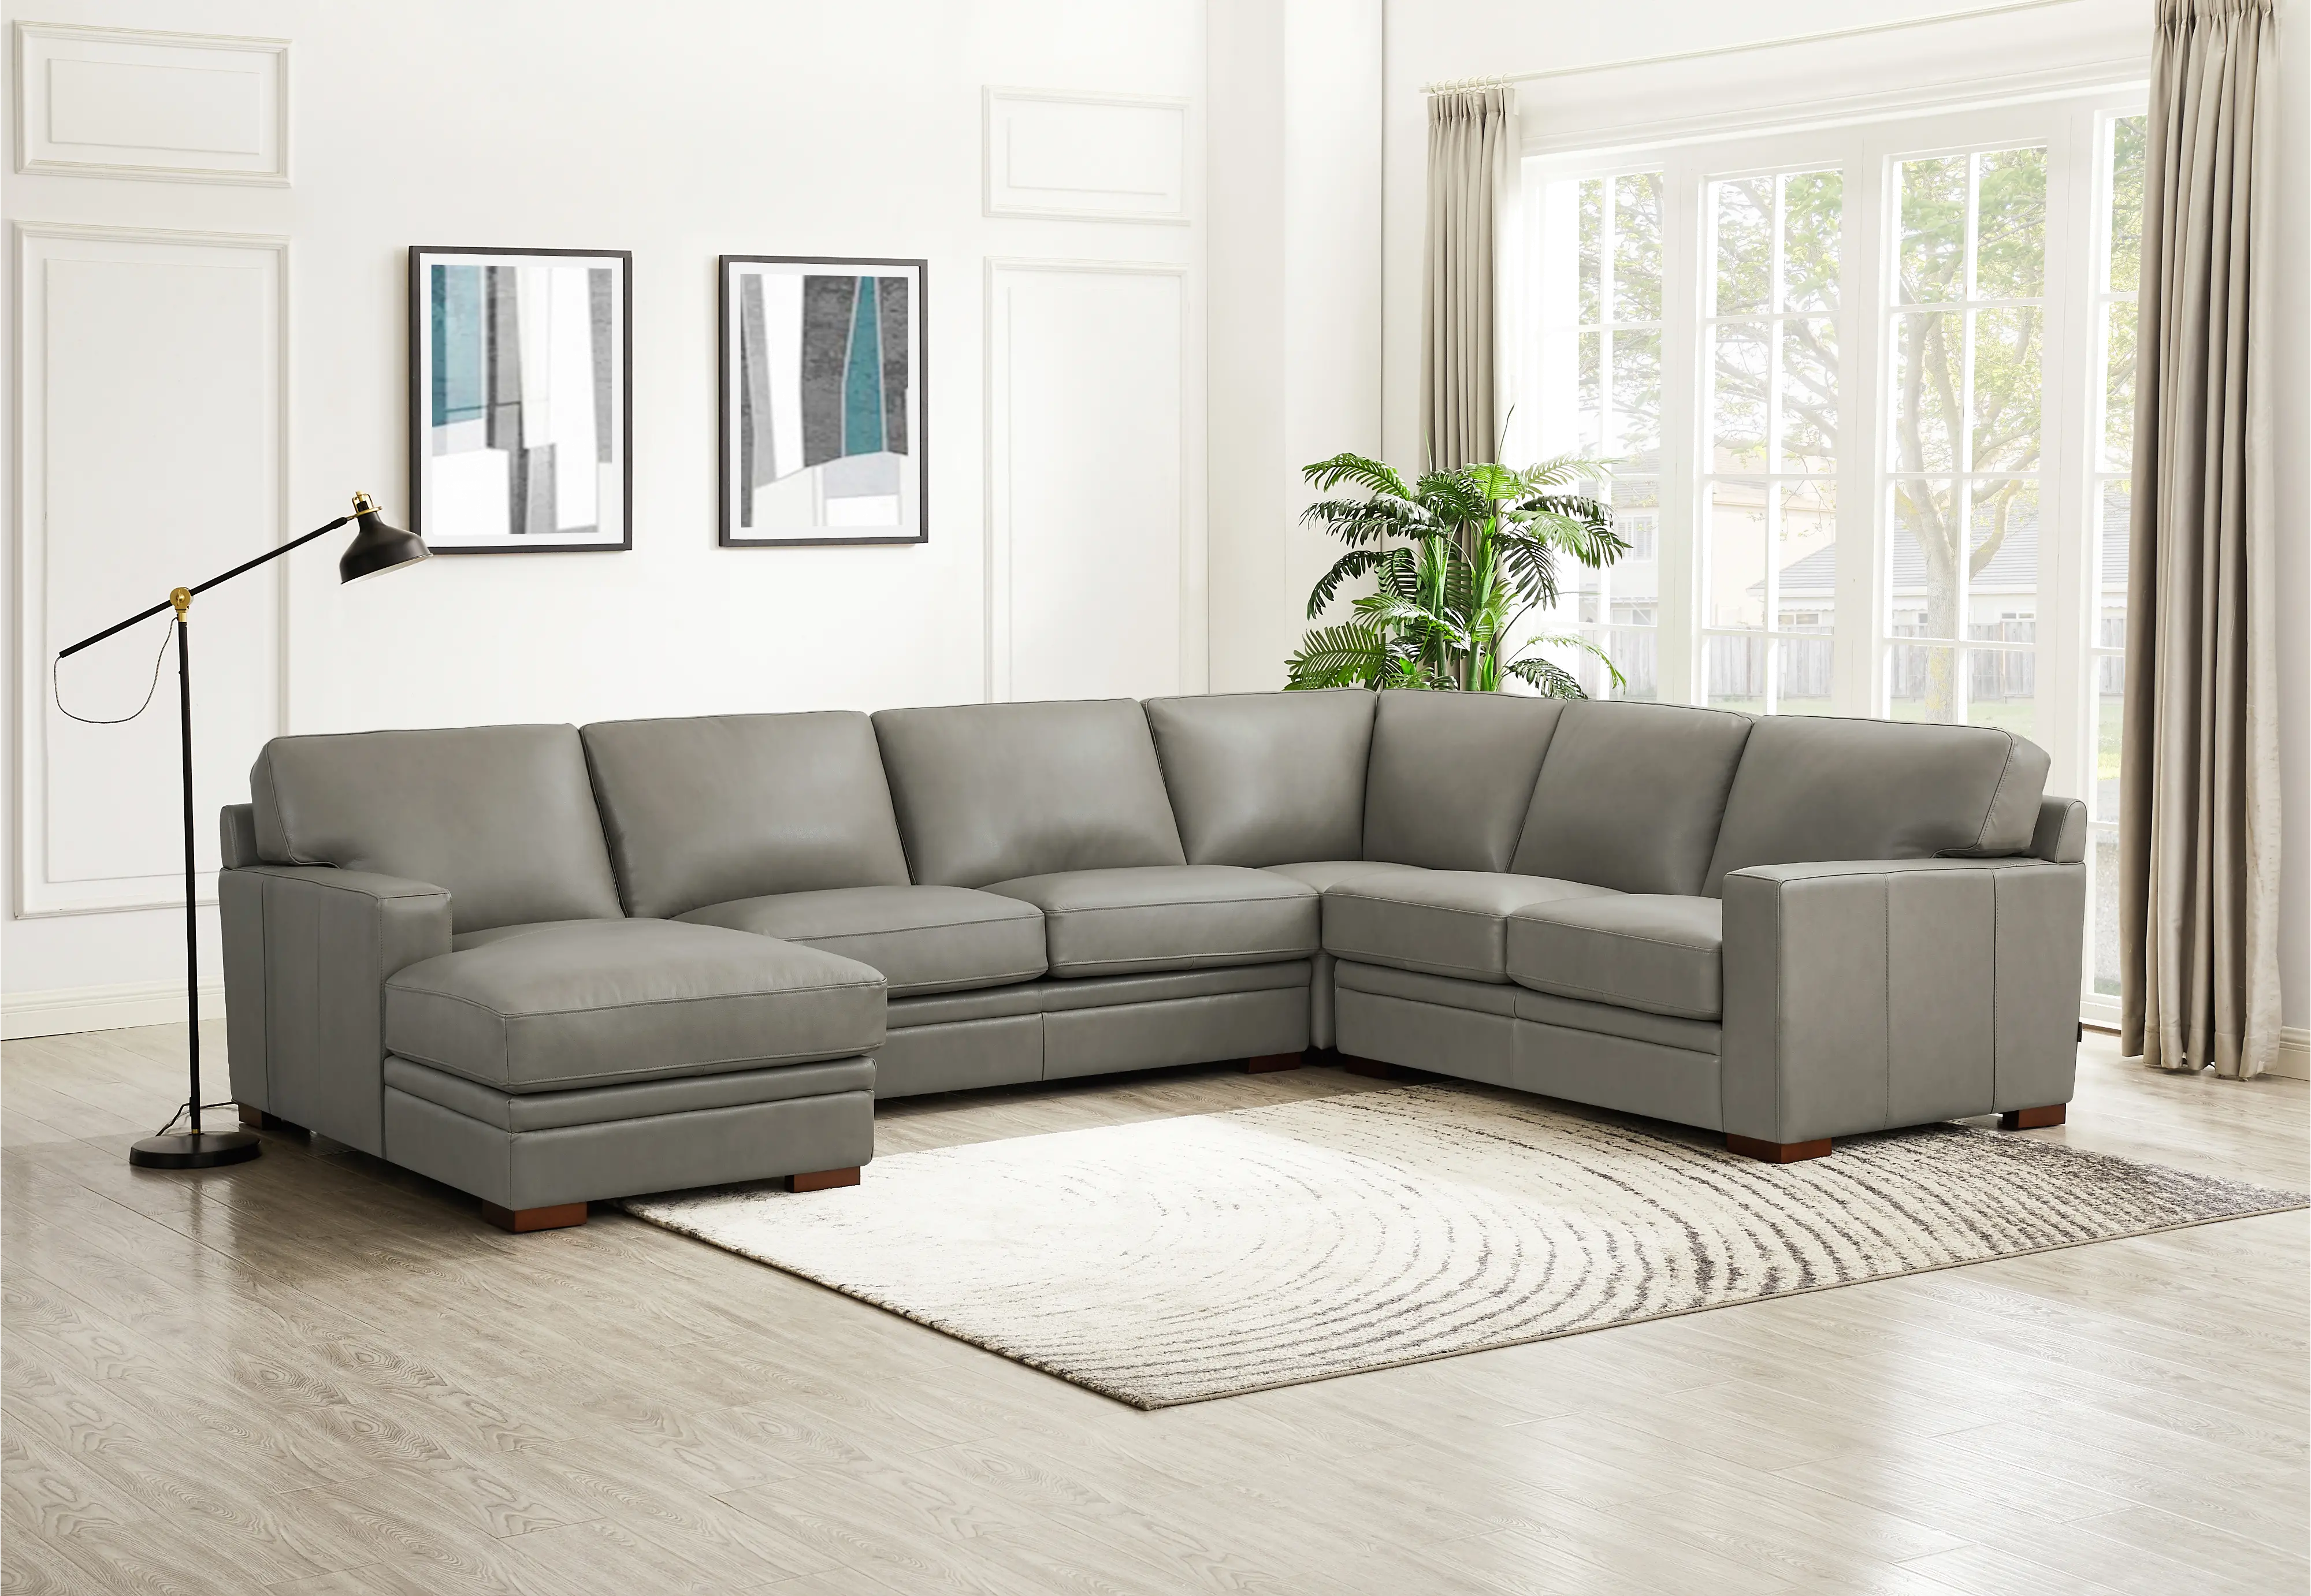 7727-SECT4-LHFCH-2376 Chatsworth Gray Leather 4 Piece Sectional with Lef sku 7727-SECT4-LHFCH-2376